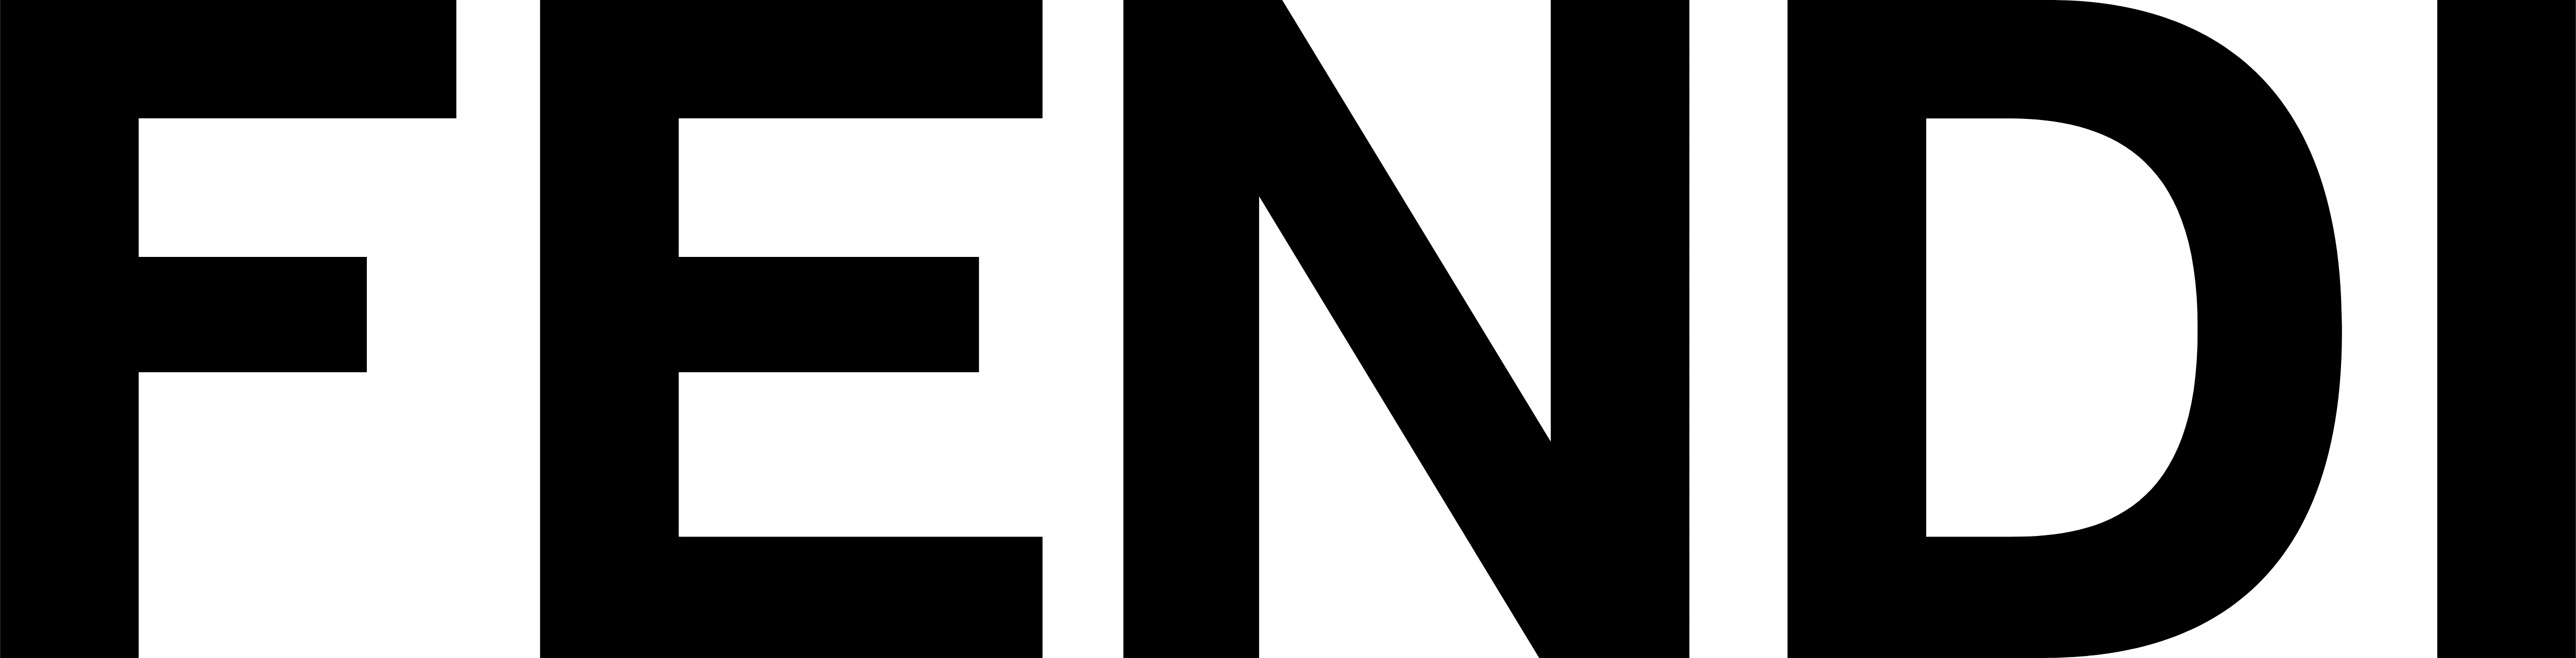 Fendi brand logo wallpapers and images - wallpapers, pictures, photos